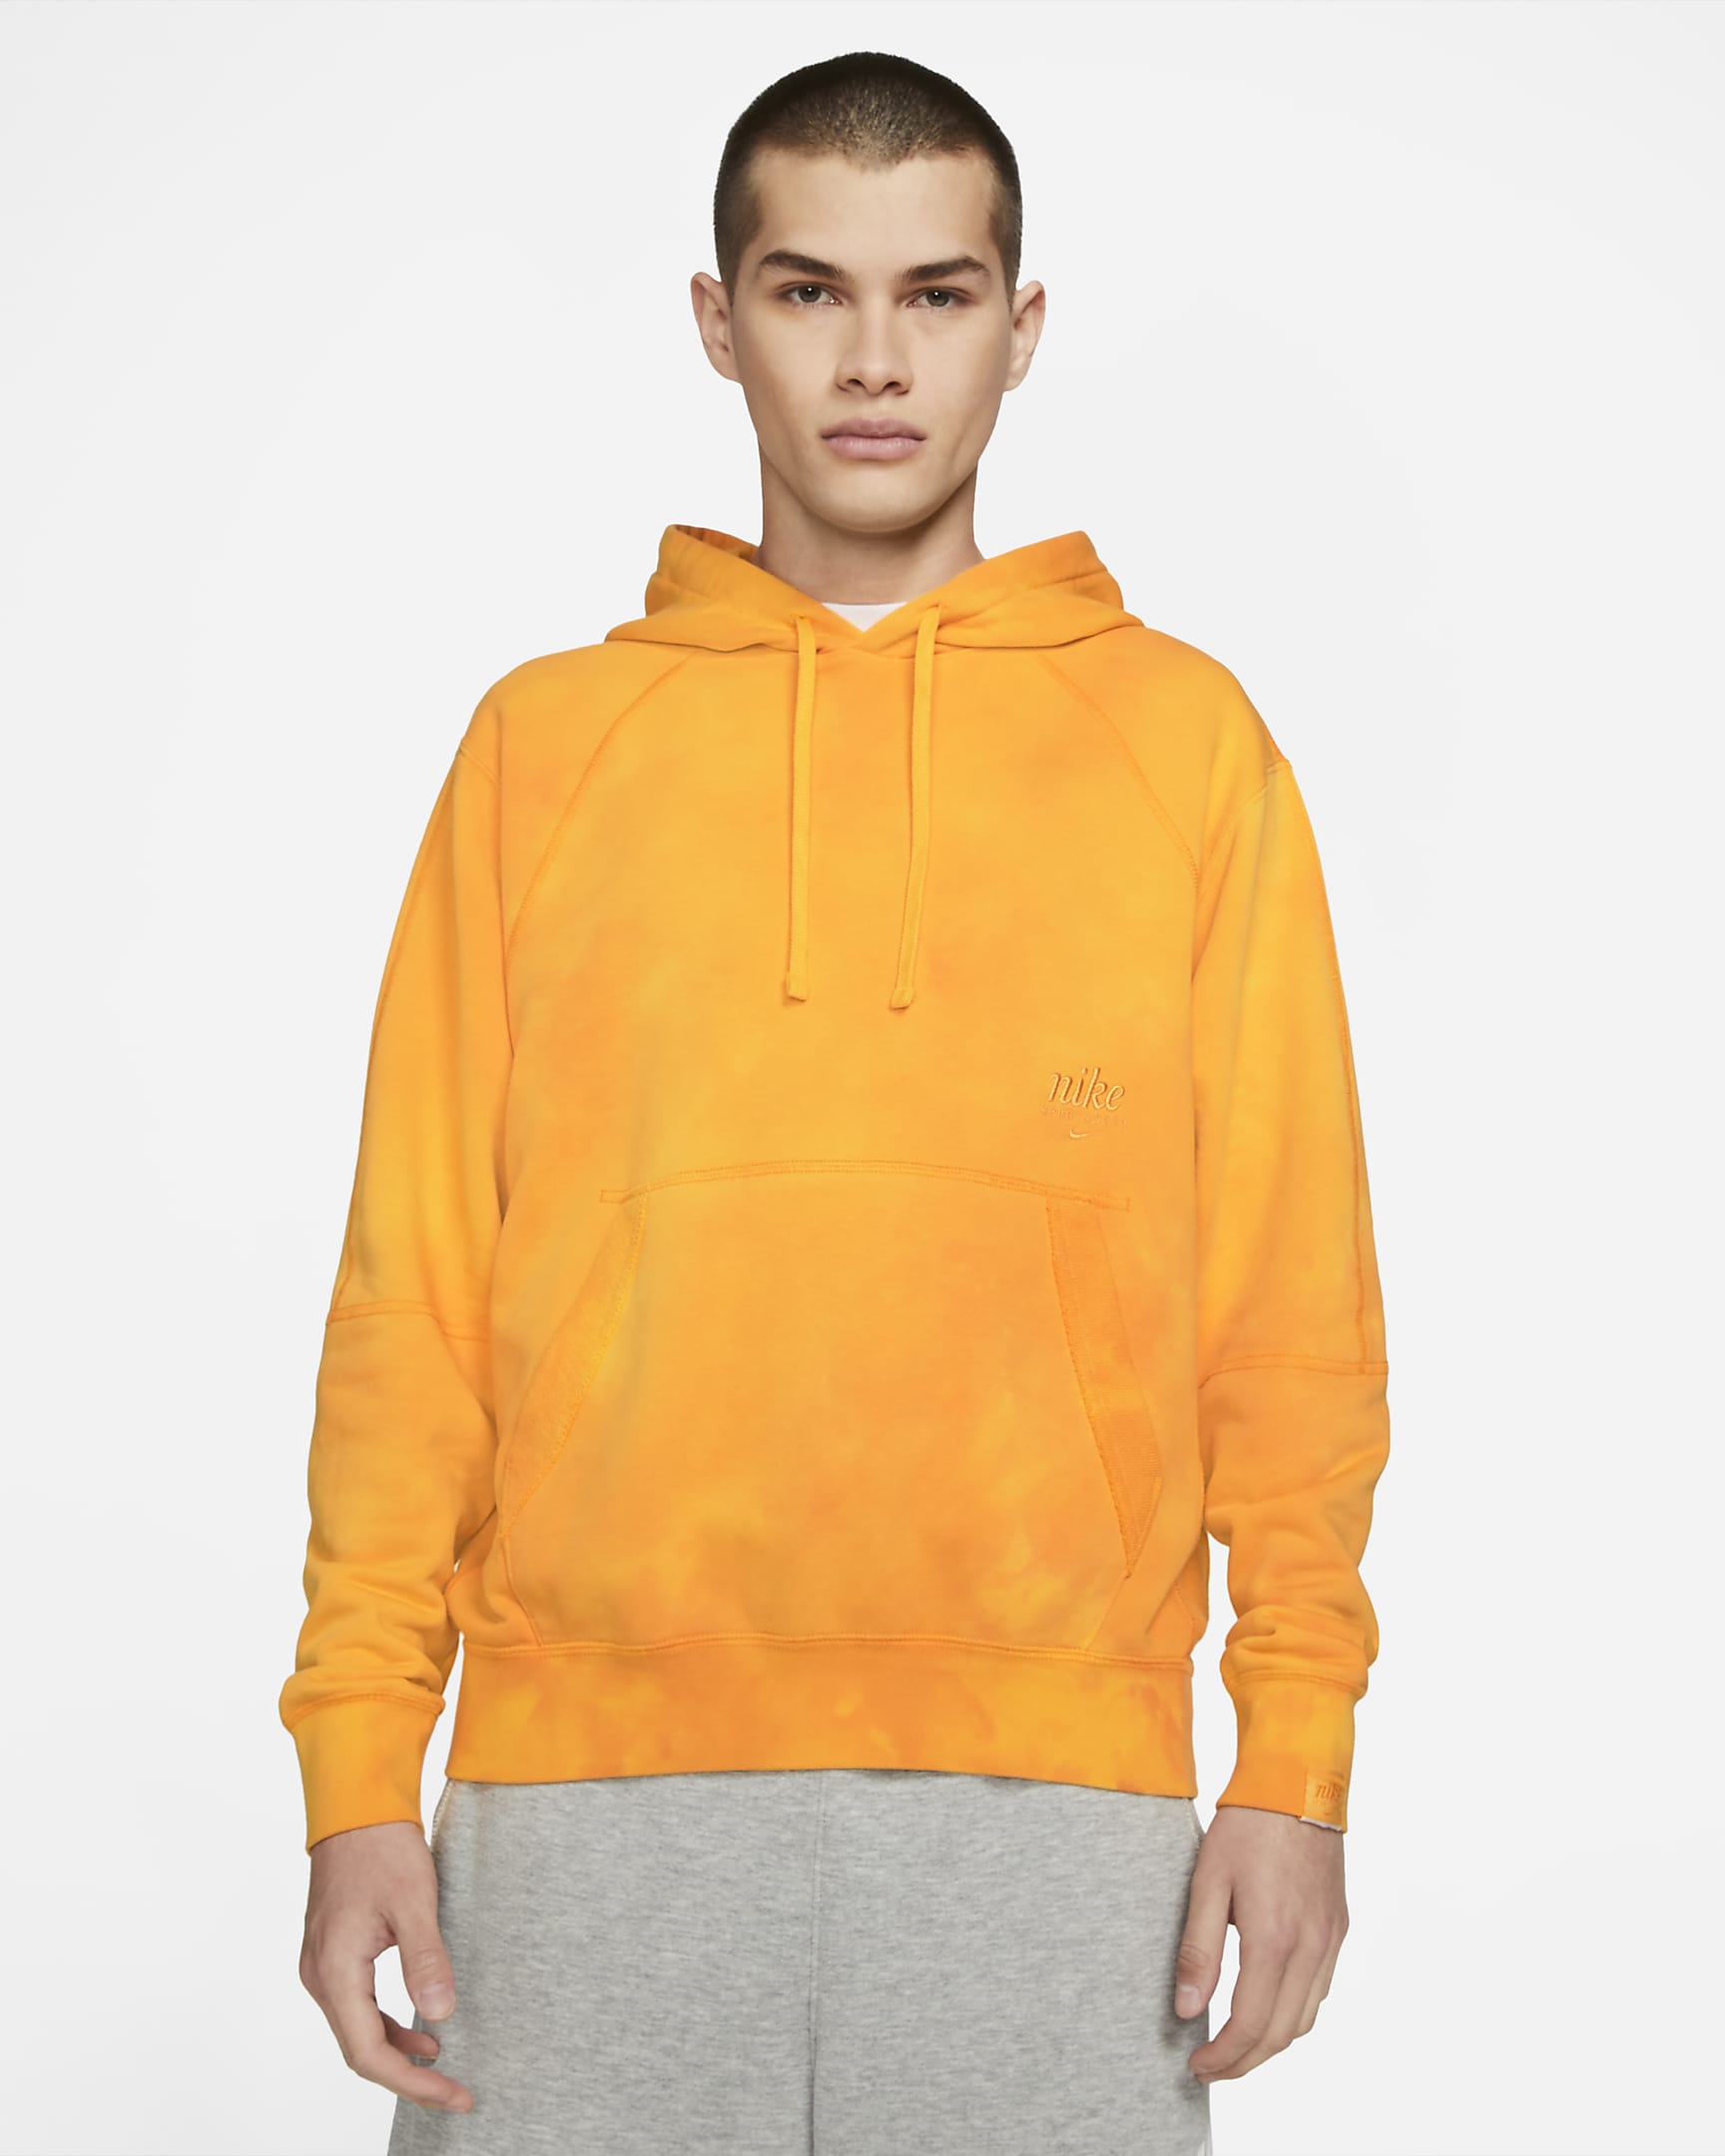 nike-sportswear-club-mens-tie-dye-french-terry-pullover-hoodie-pDsb4f.png